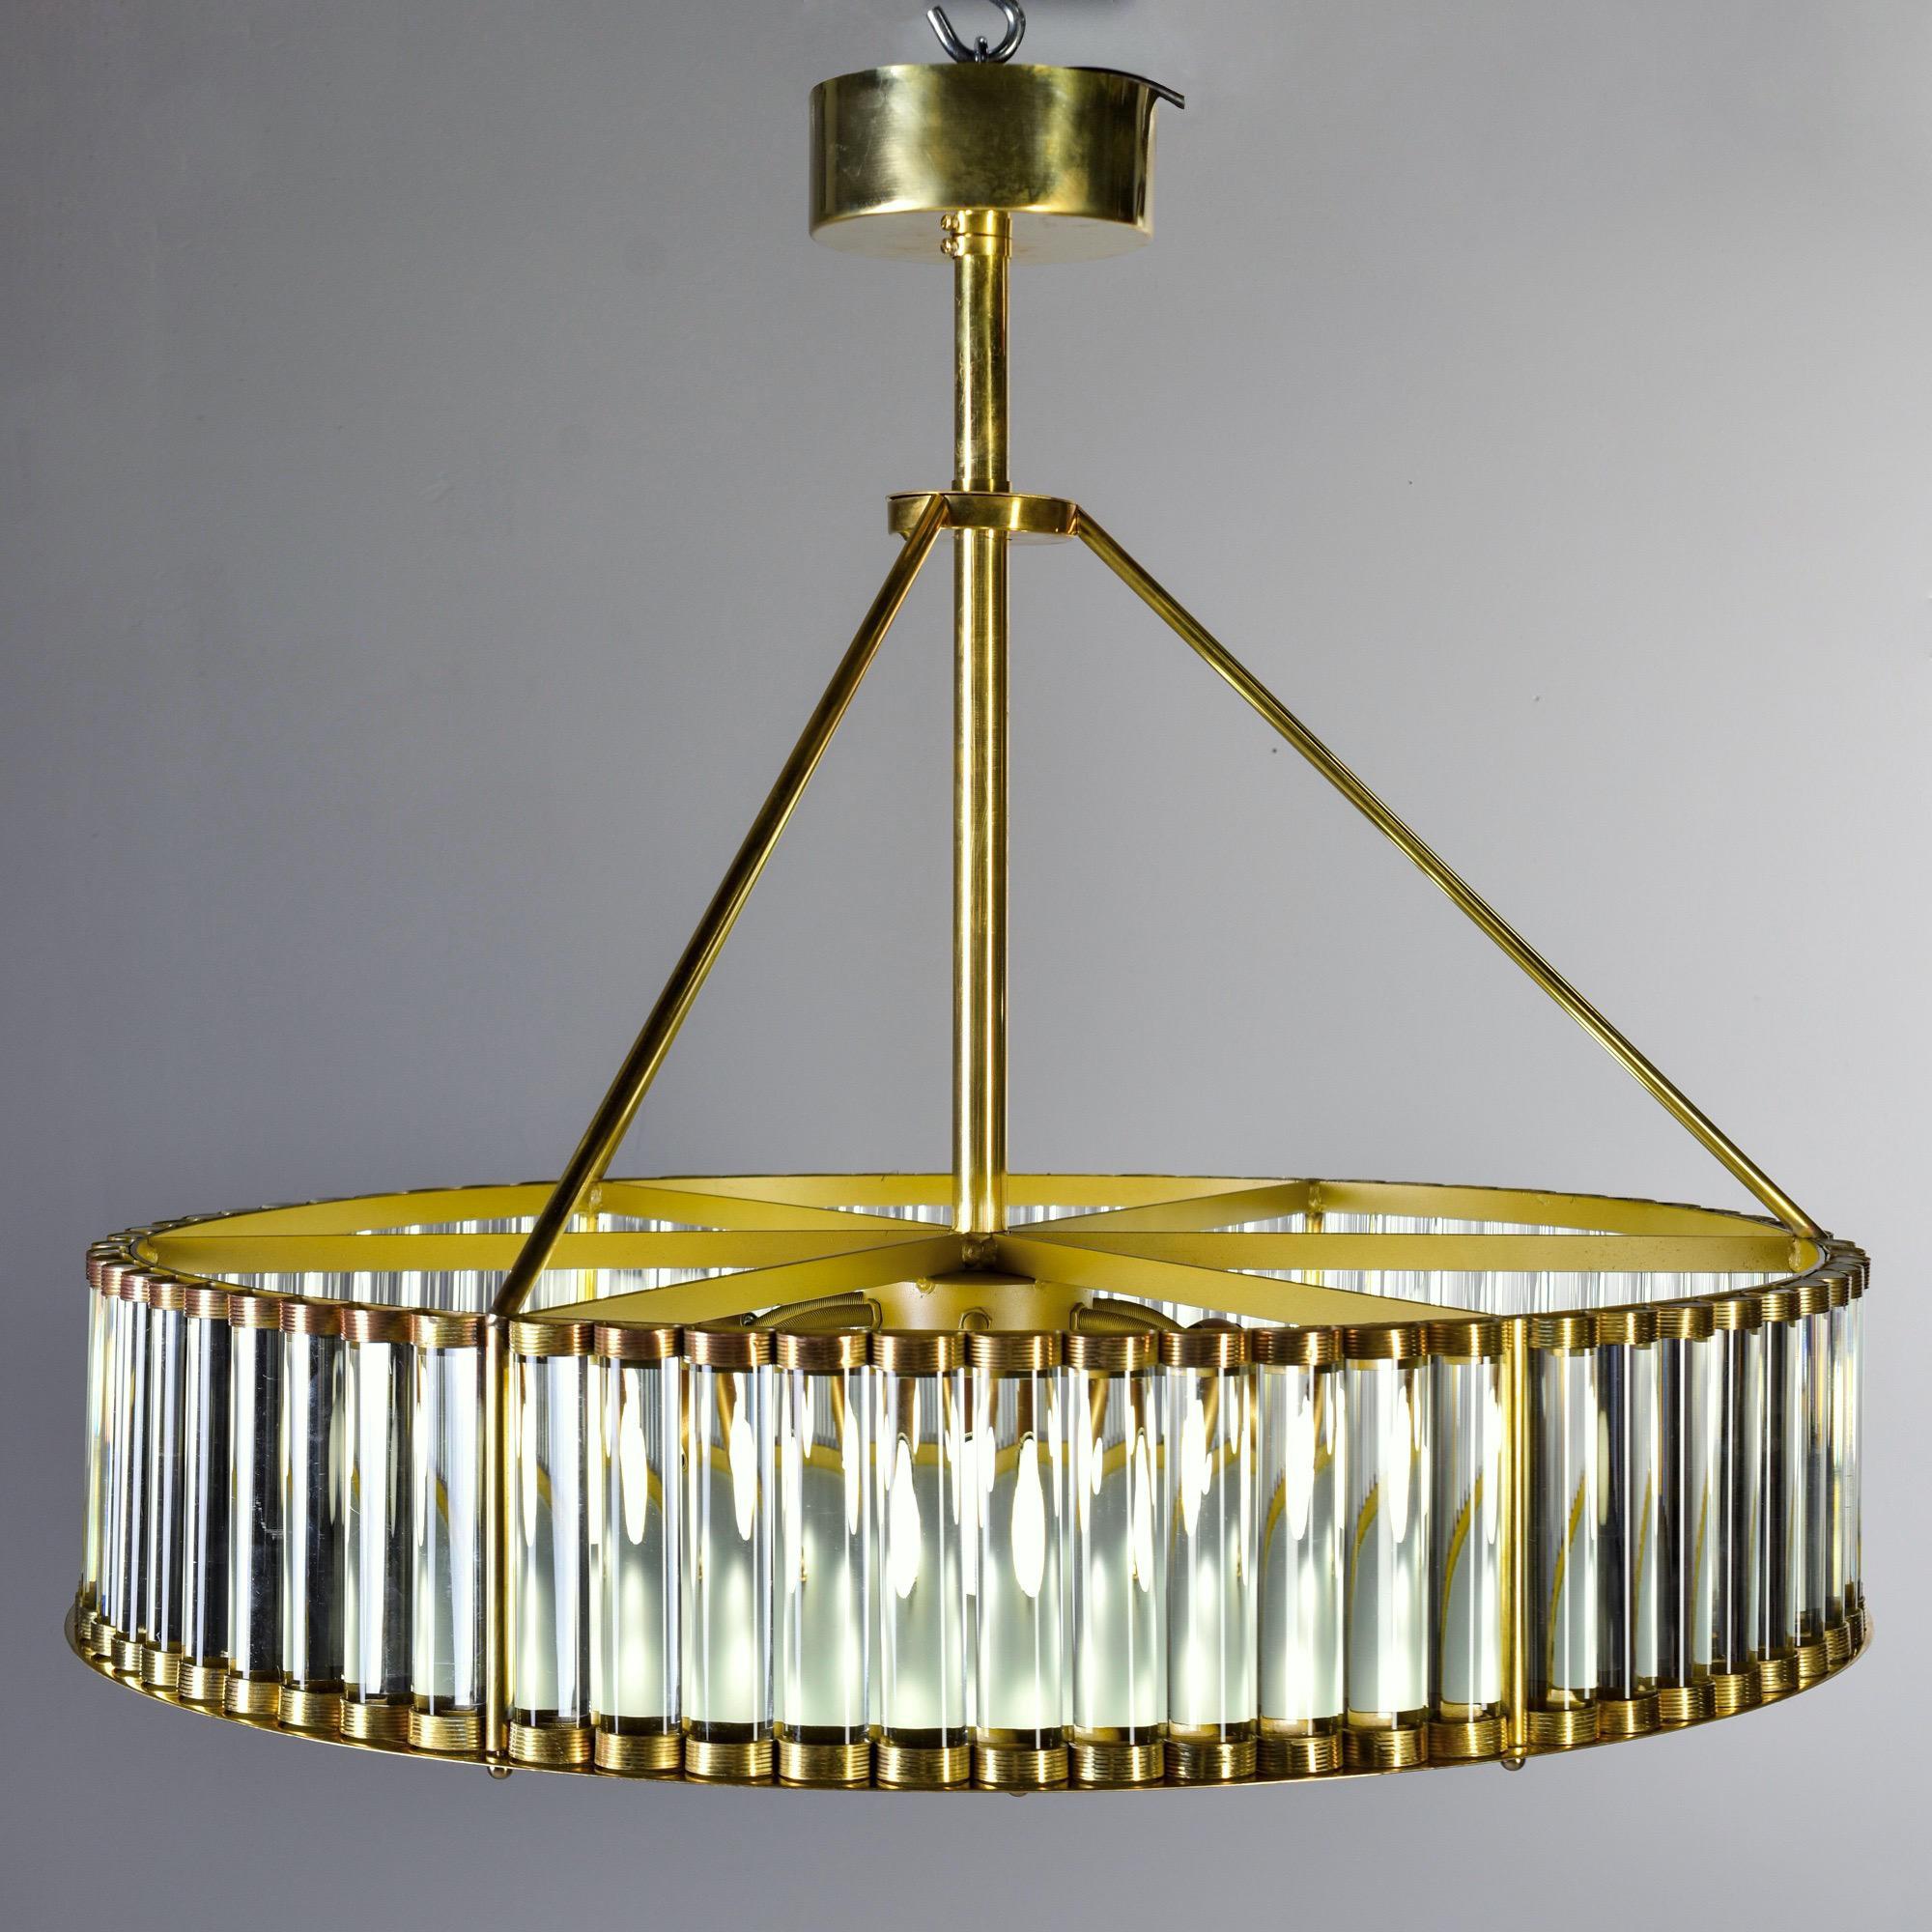 Made in Italy, this deco style hanging fixture has a shade made of thick, clear glass rods and polished brass with a satin glass cover and six standard sized sockets. New with wiring for US electrical standards.

Height shown is total from finial